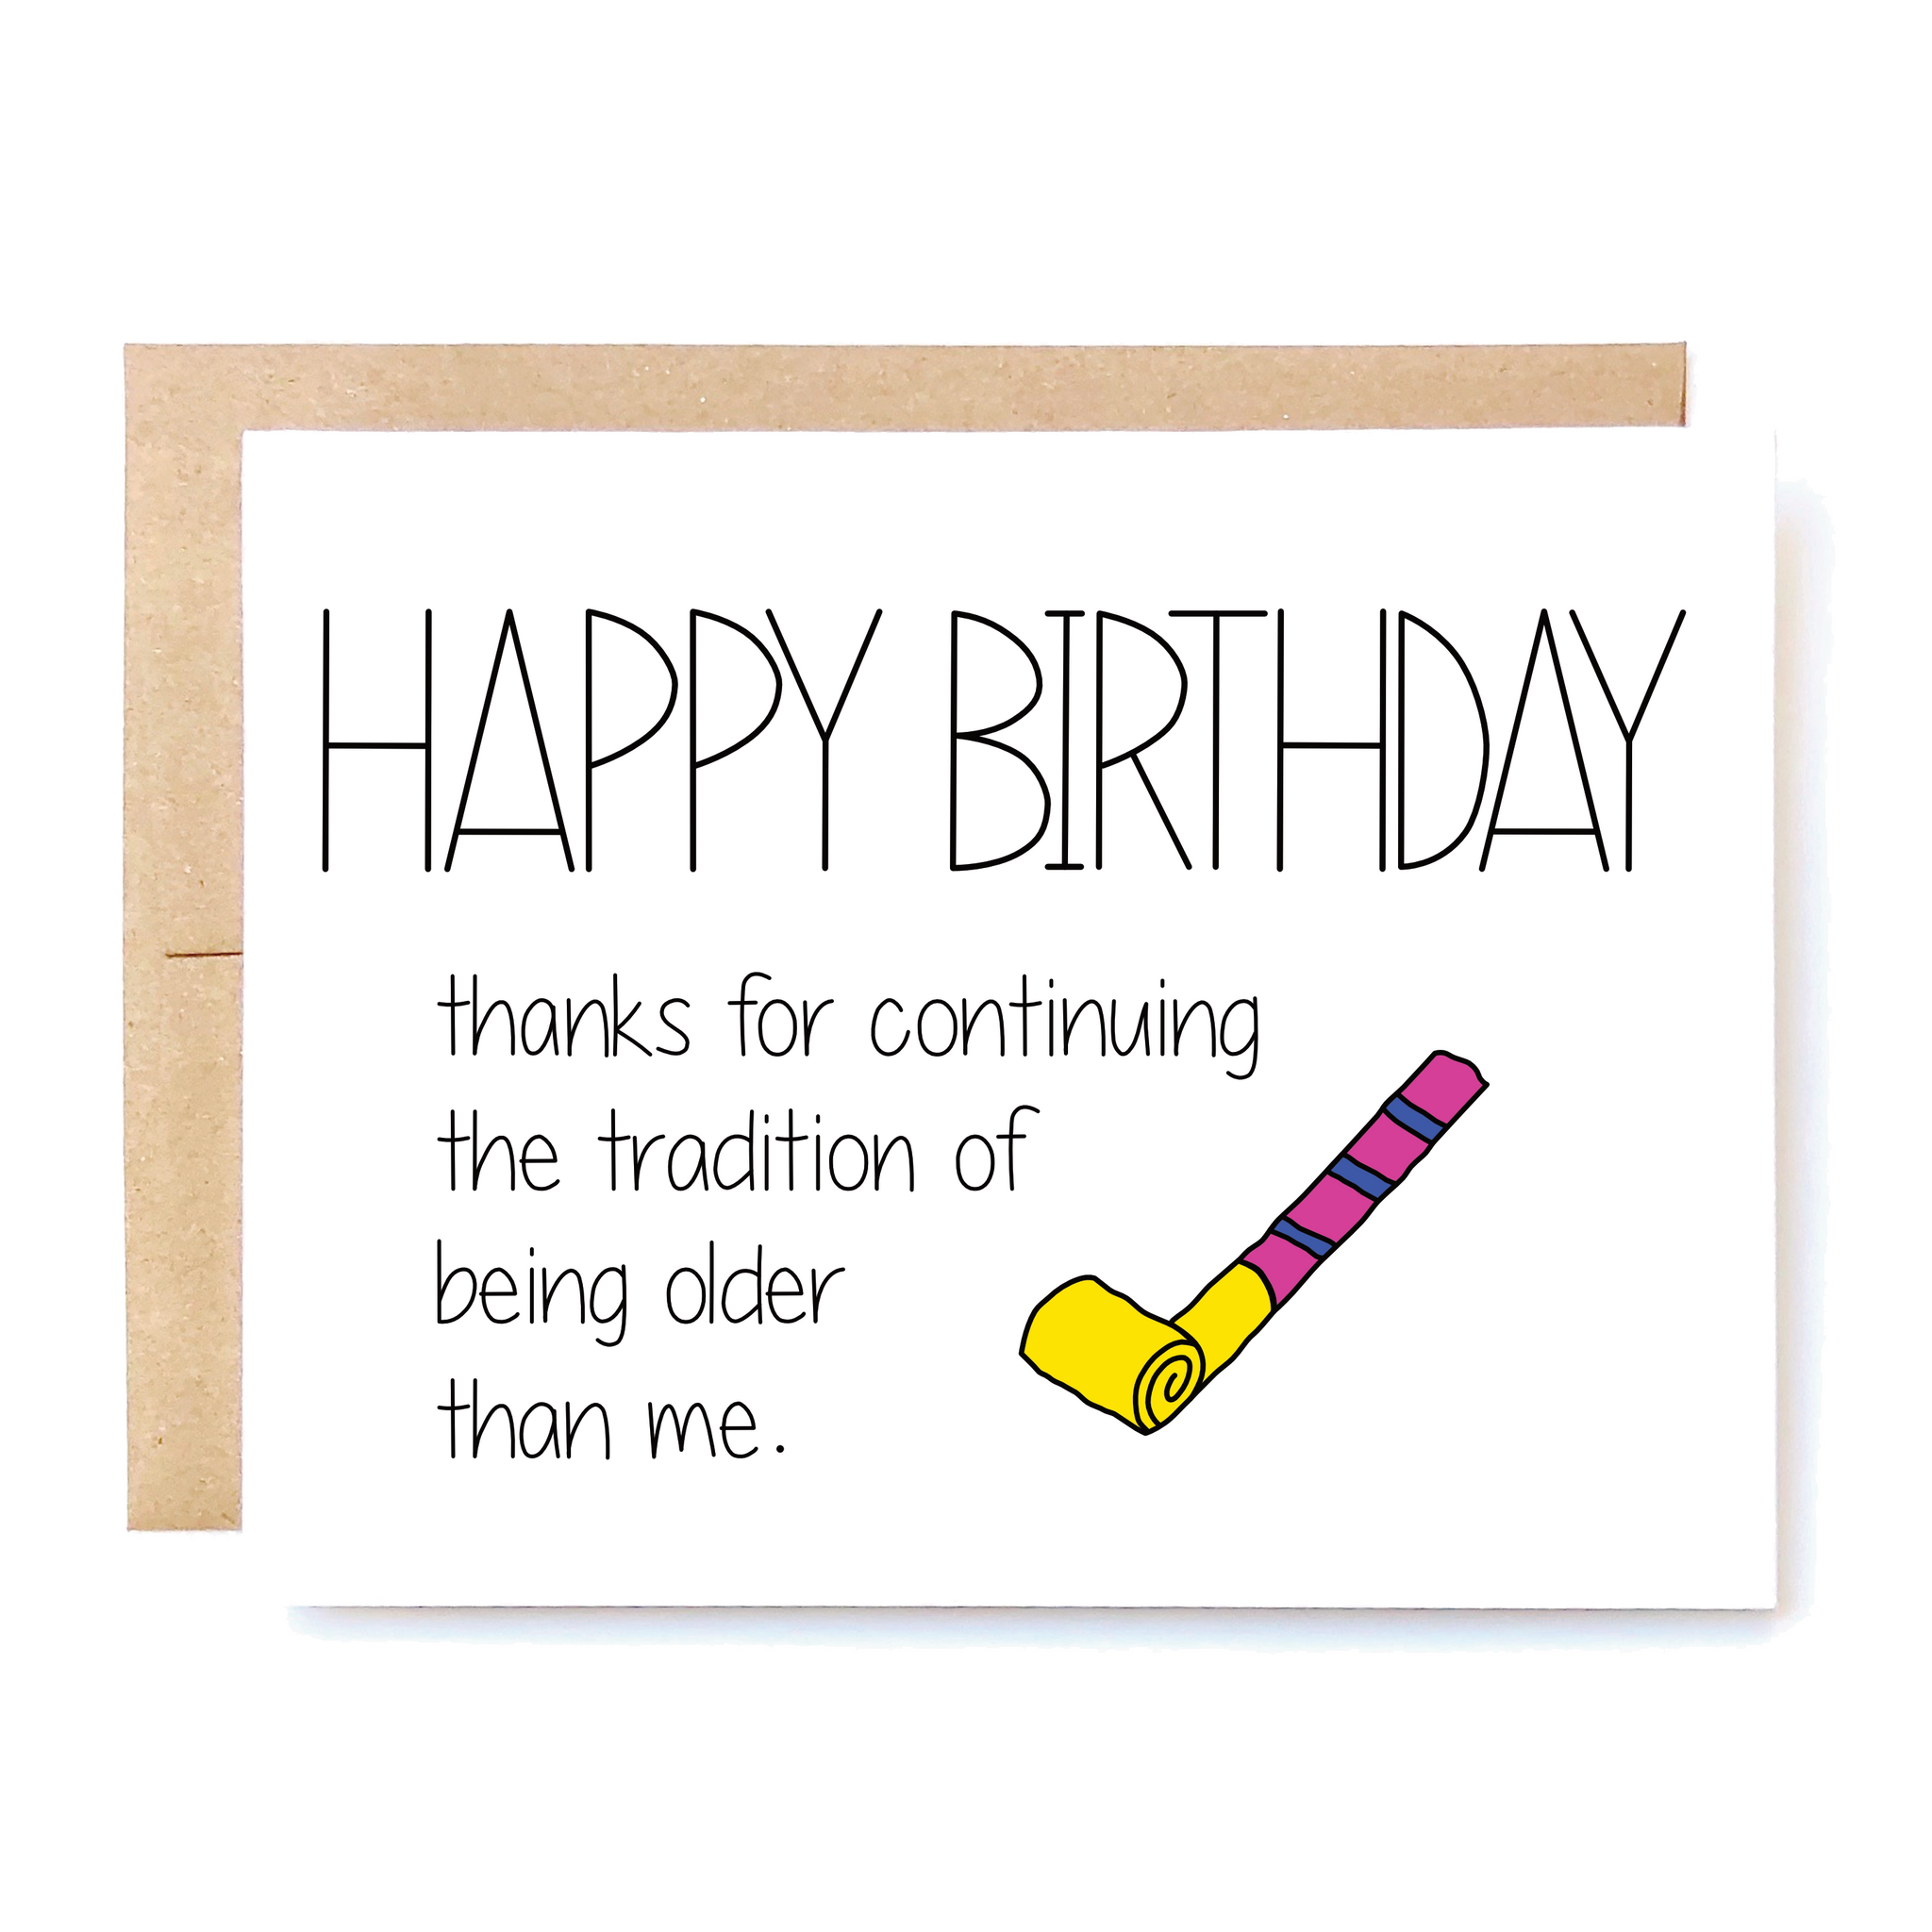 Card Front: Happy birthday. Thanks for continuing the tradition of being older than me.